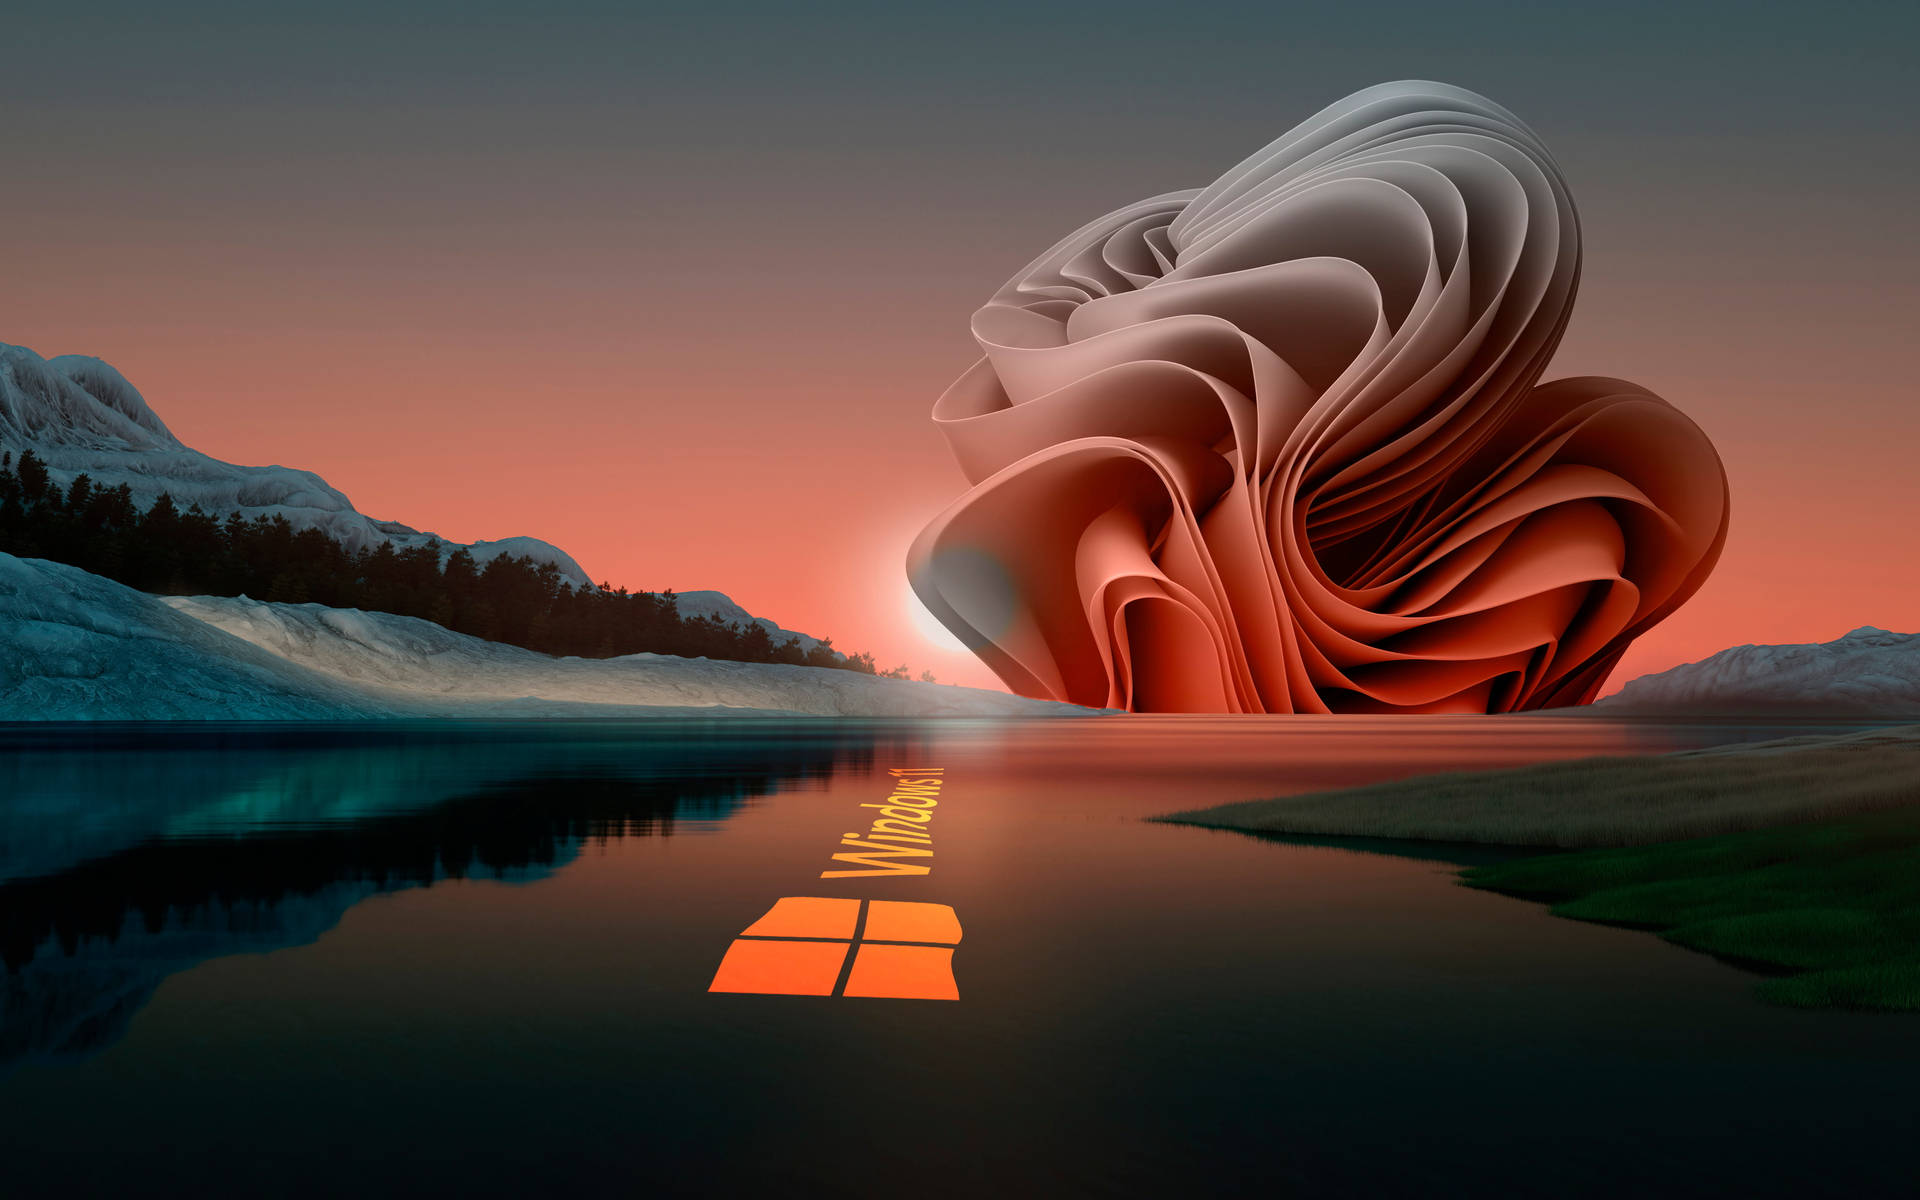 Charming Photograph With Windows 11 Logo Wallpaper